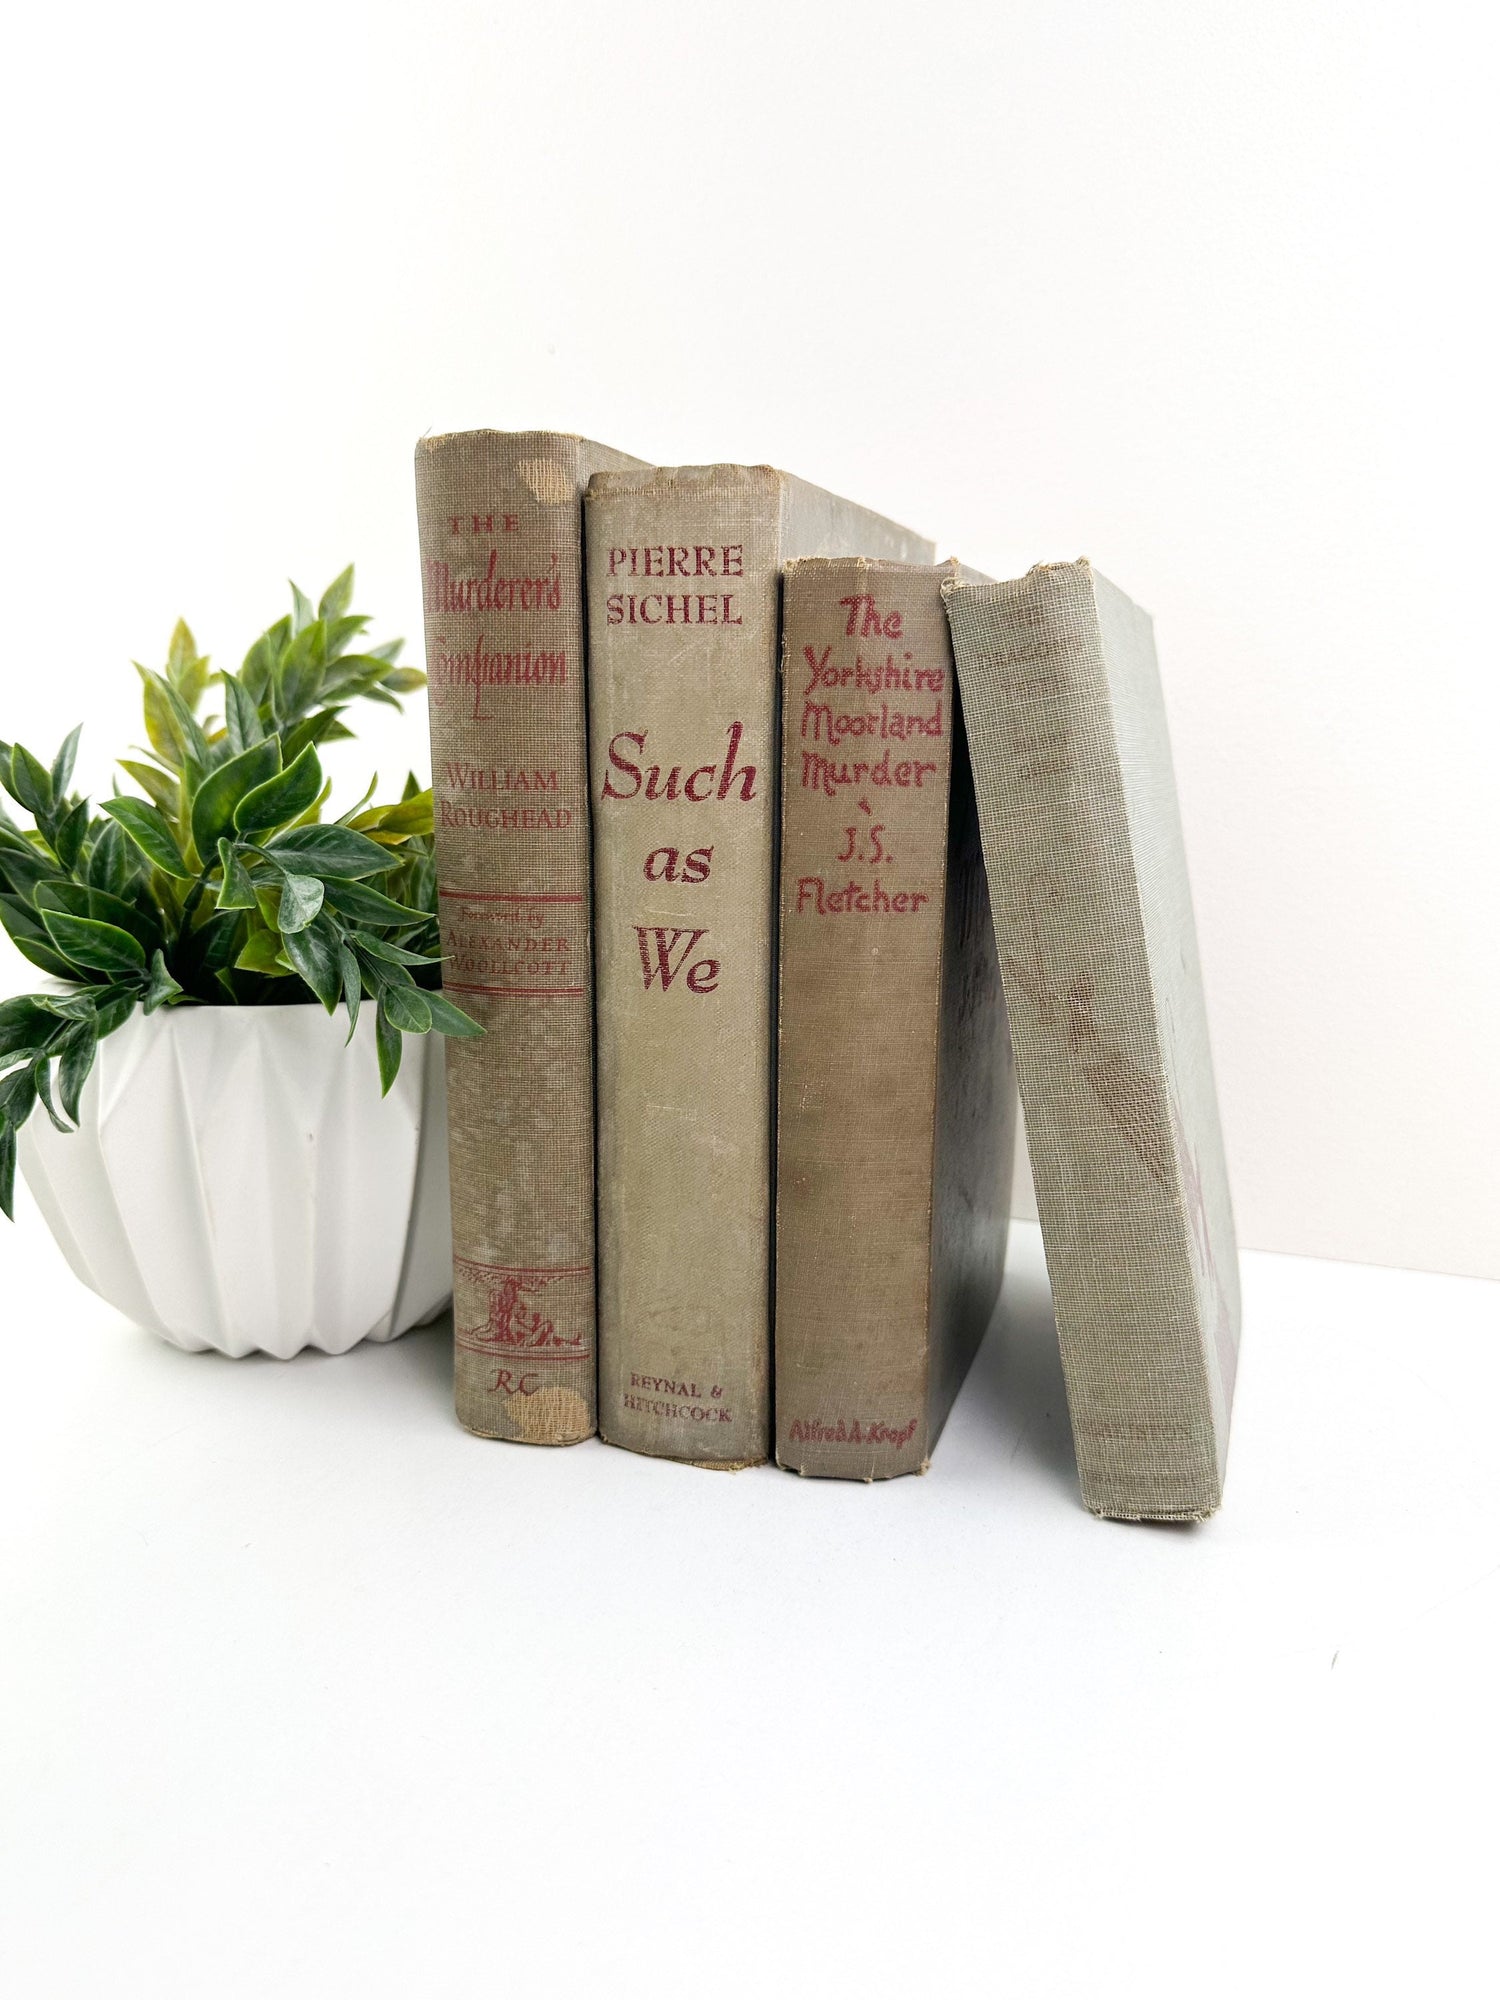 Book Decor, Vintage Books for Table Decor, Book Stack, Books by Color